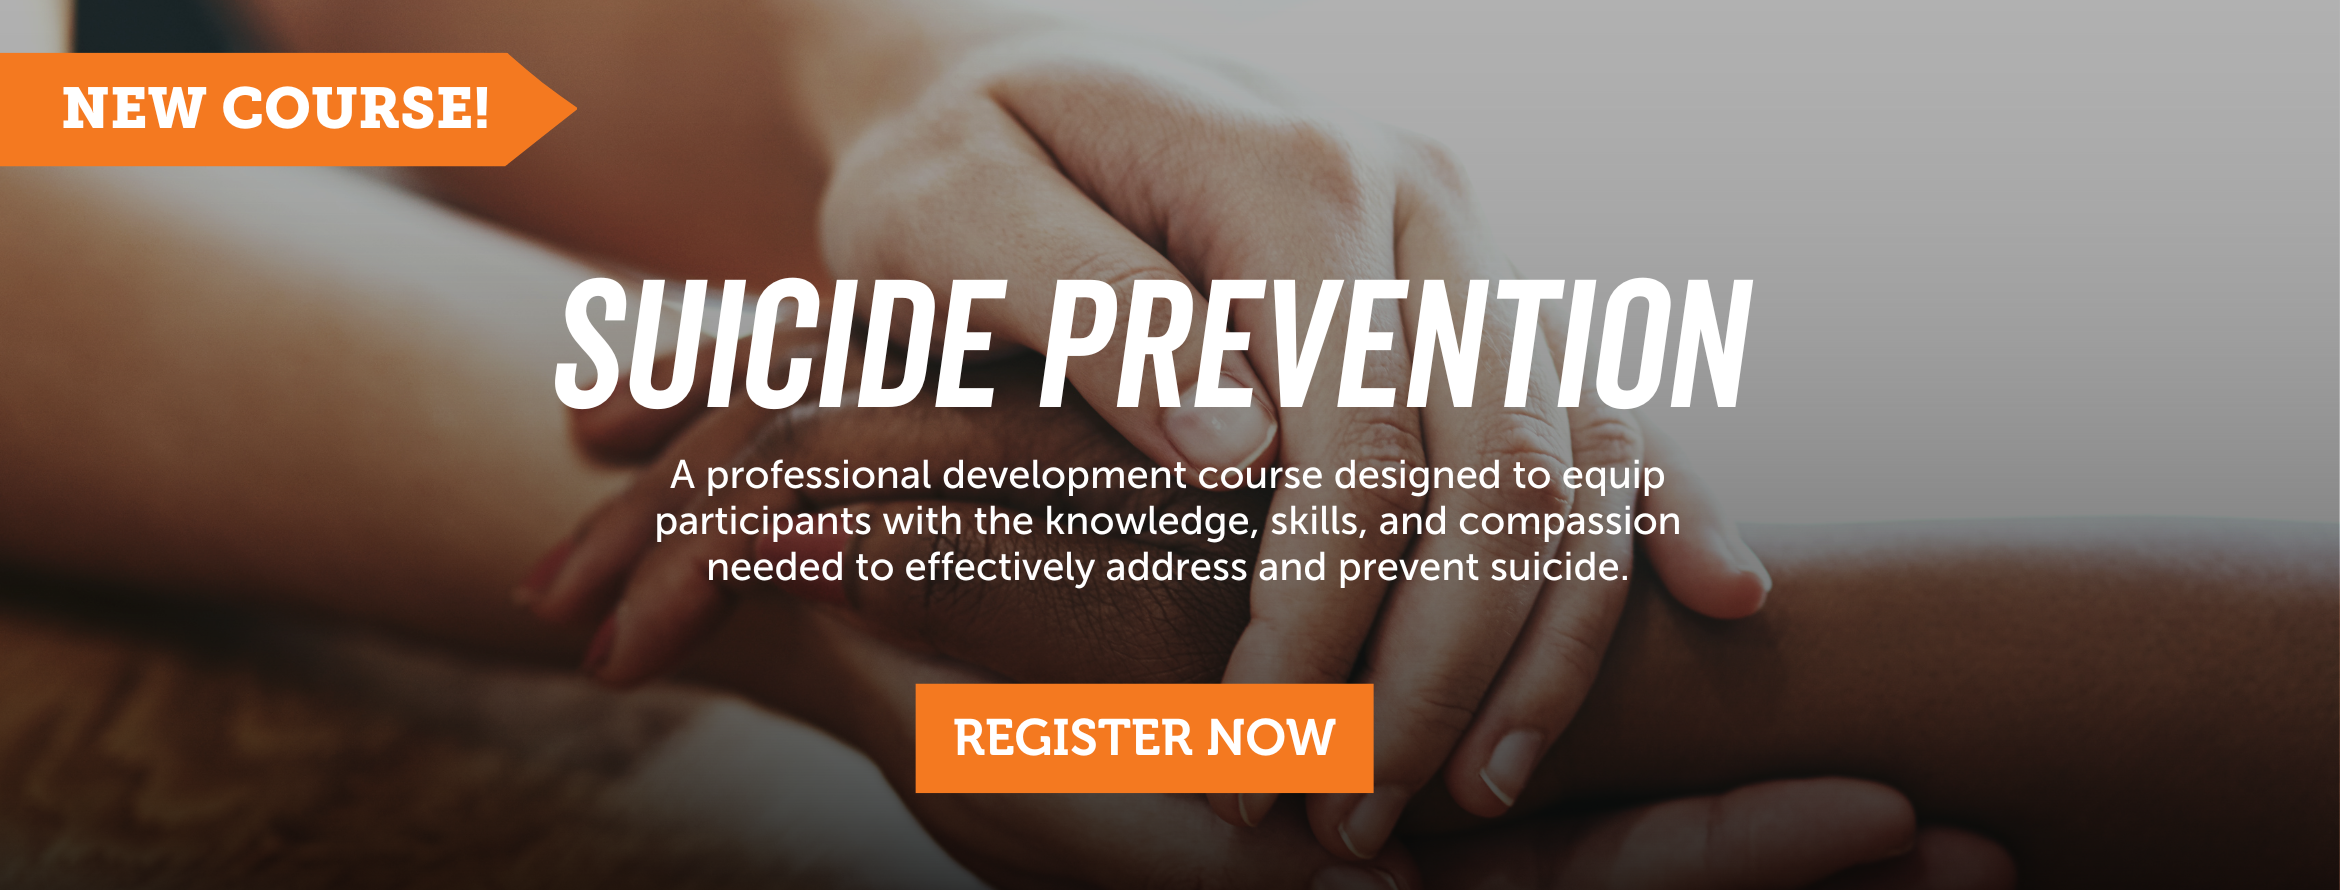 Slider containing information about a new course, Suicide Prevention